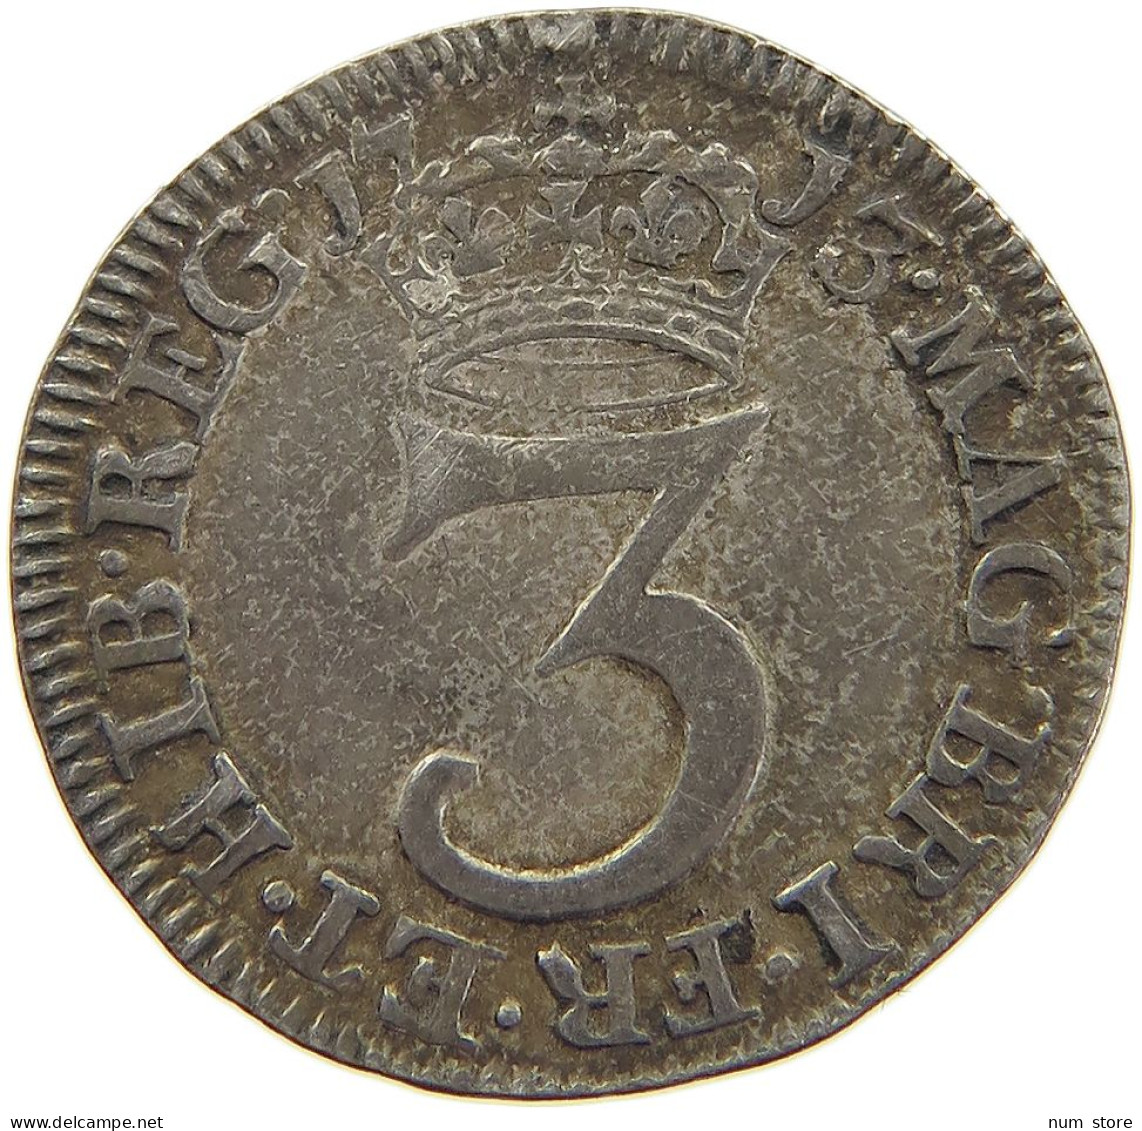 GREAT BRITAIN THREEPENCE 1713 Anne (1702-1714) MAUNDY #t070 0313 - E. 3 Pence